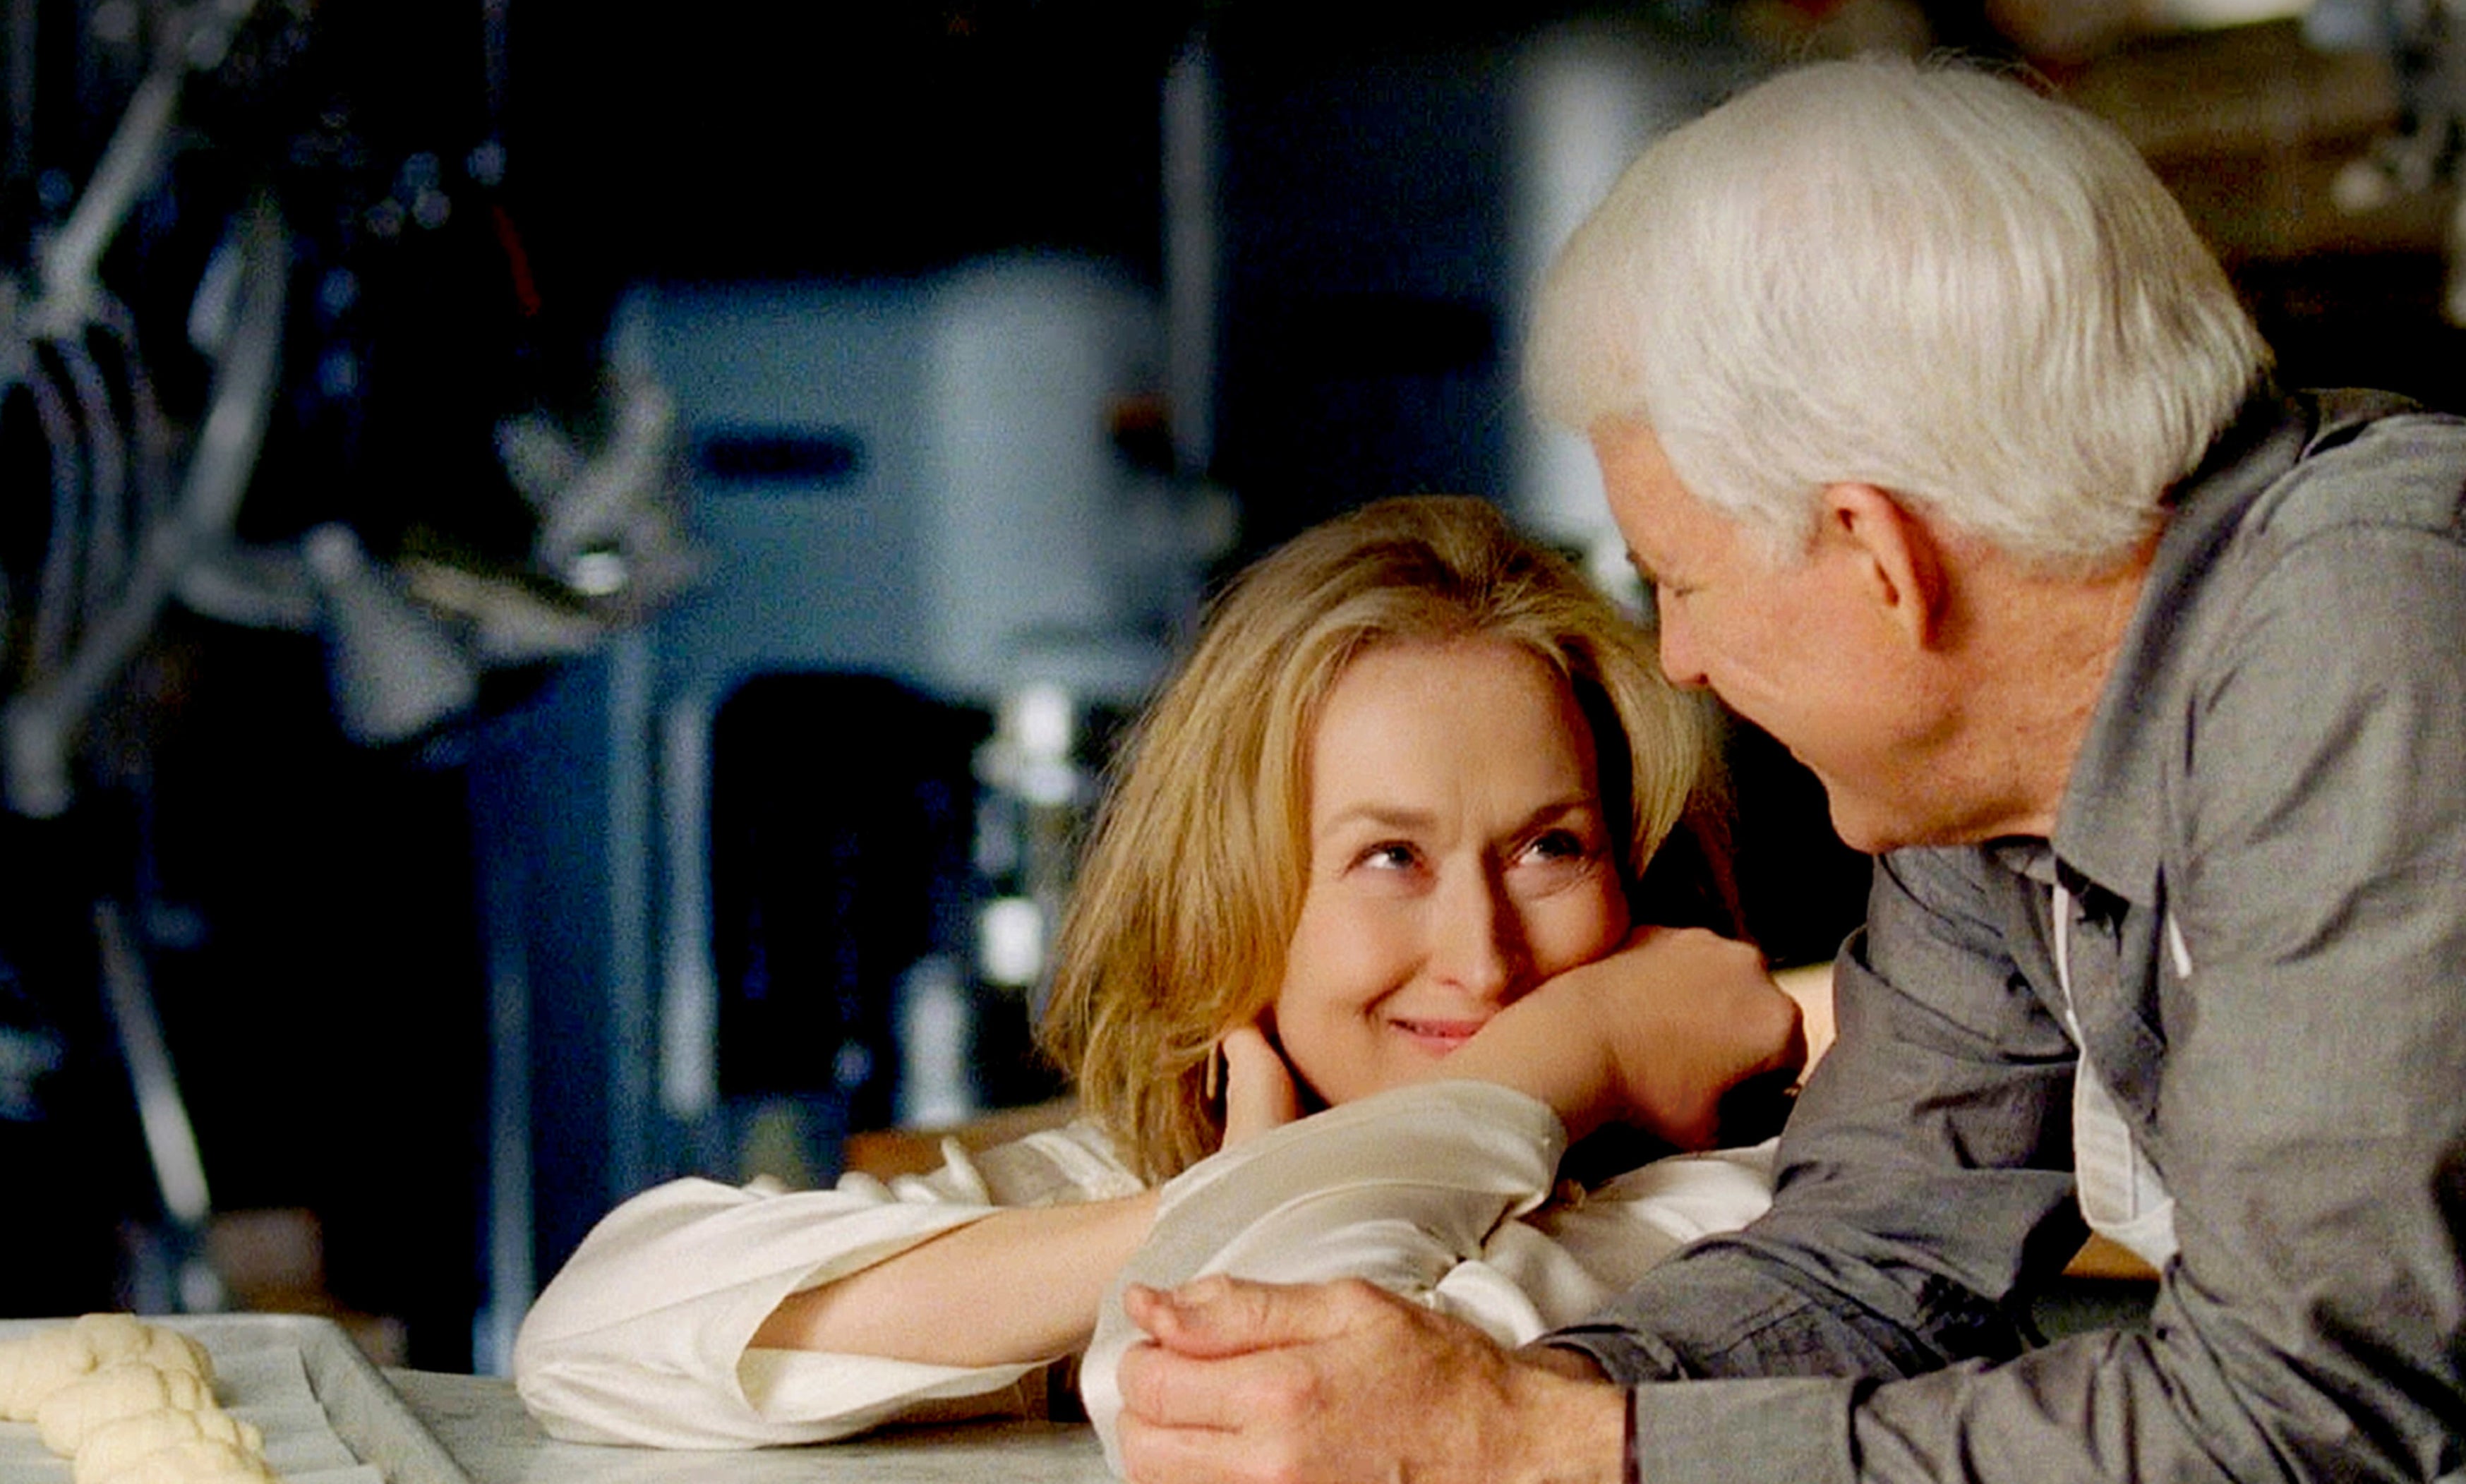 Meryl Streep and Steve Martin in a scene, leaning on a kitchen counter, sharing a moment